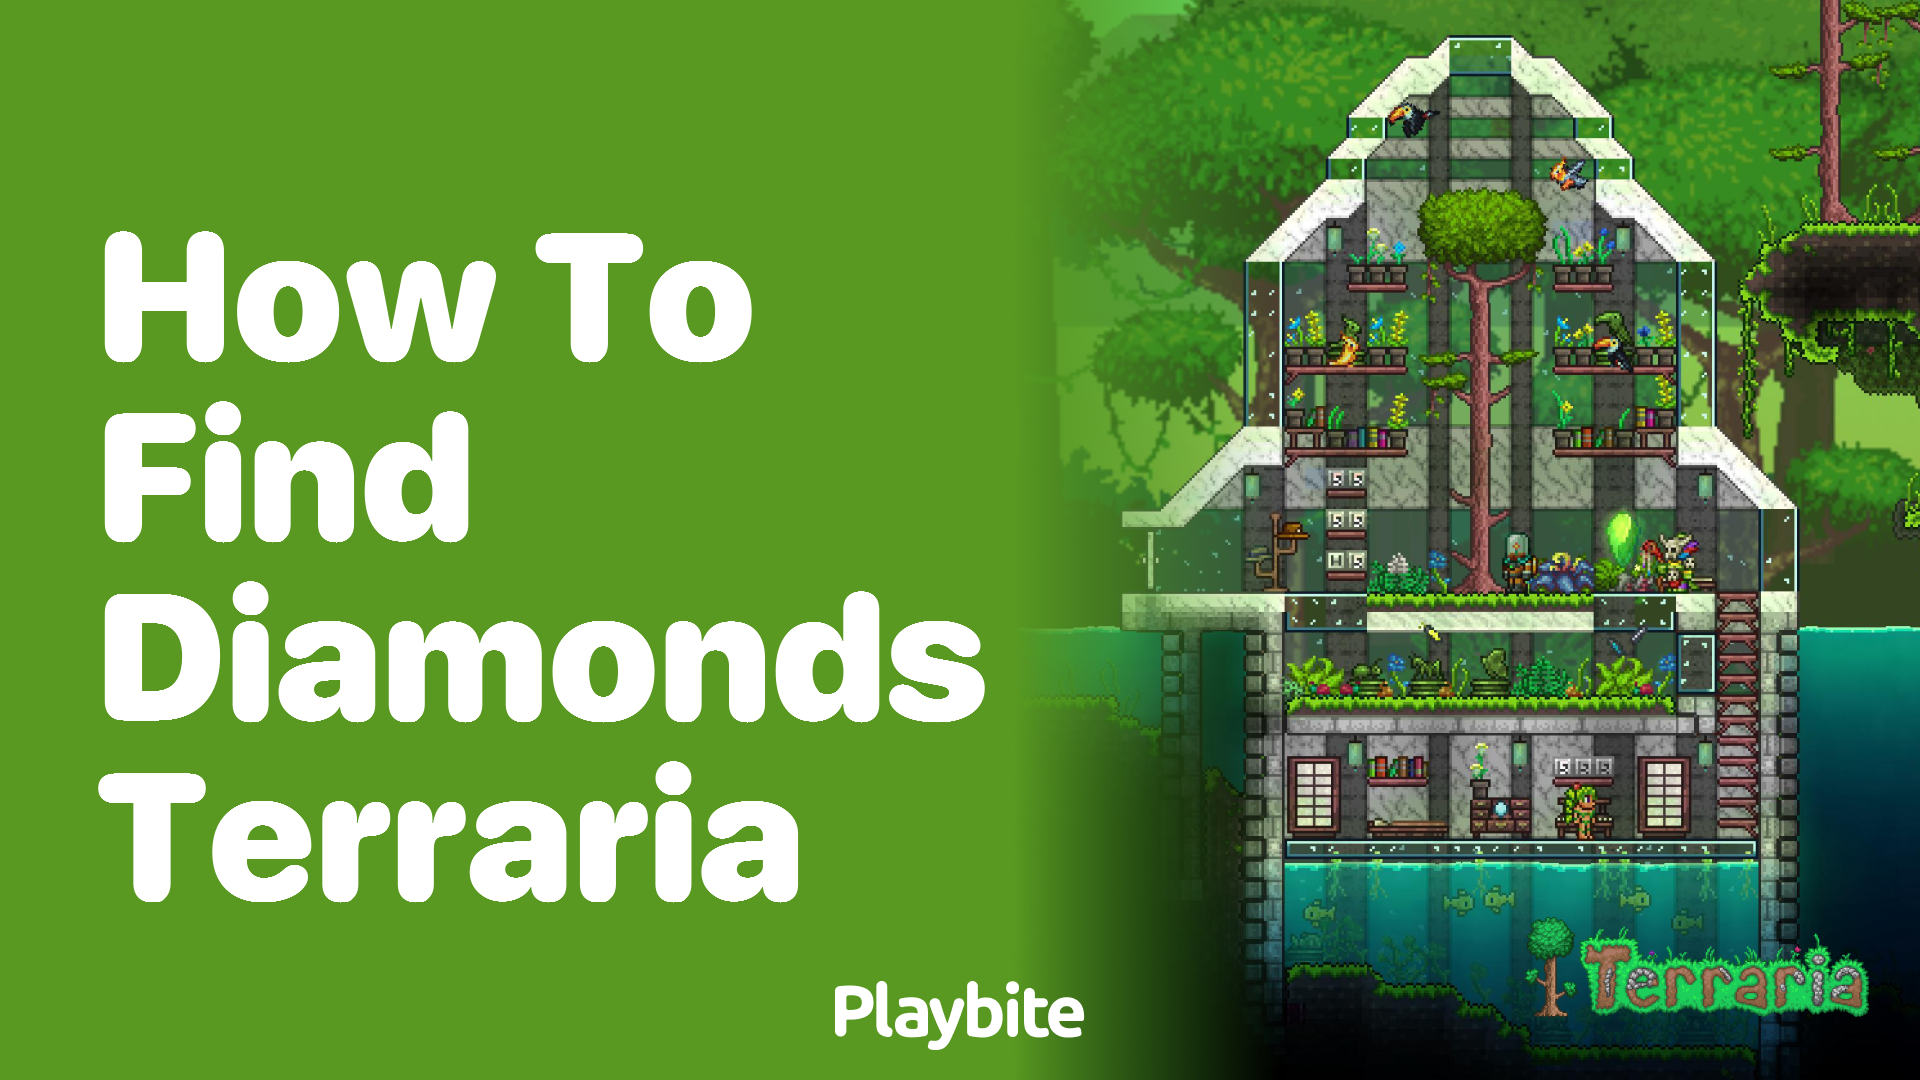 How to find diamonds in Terraria